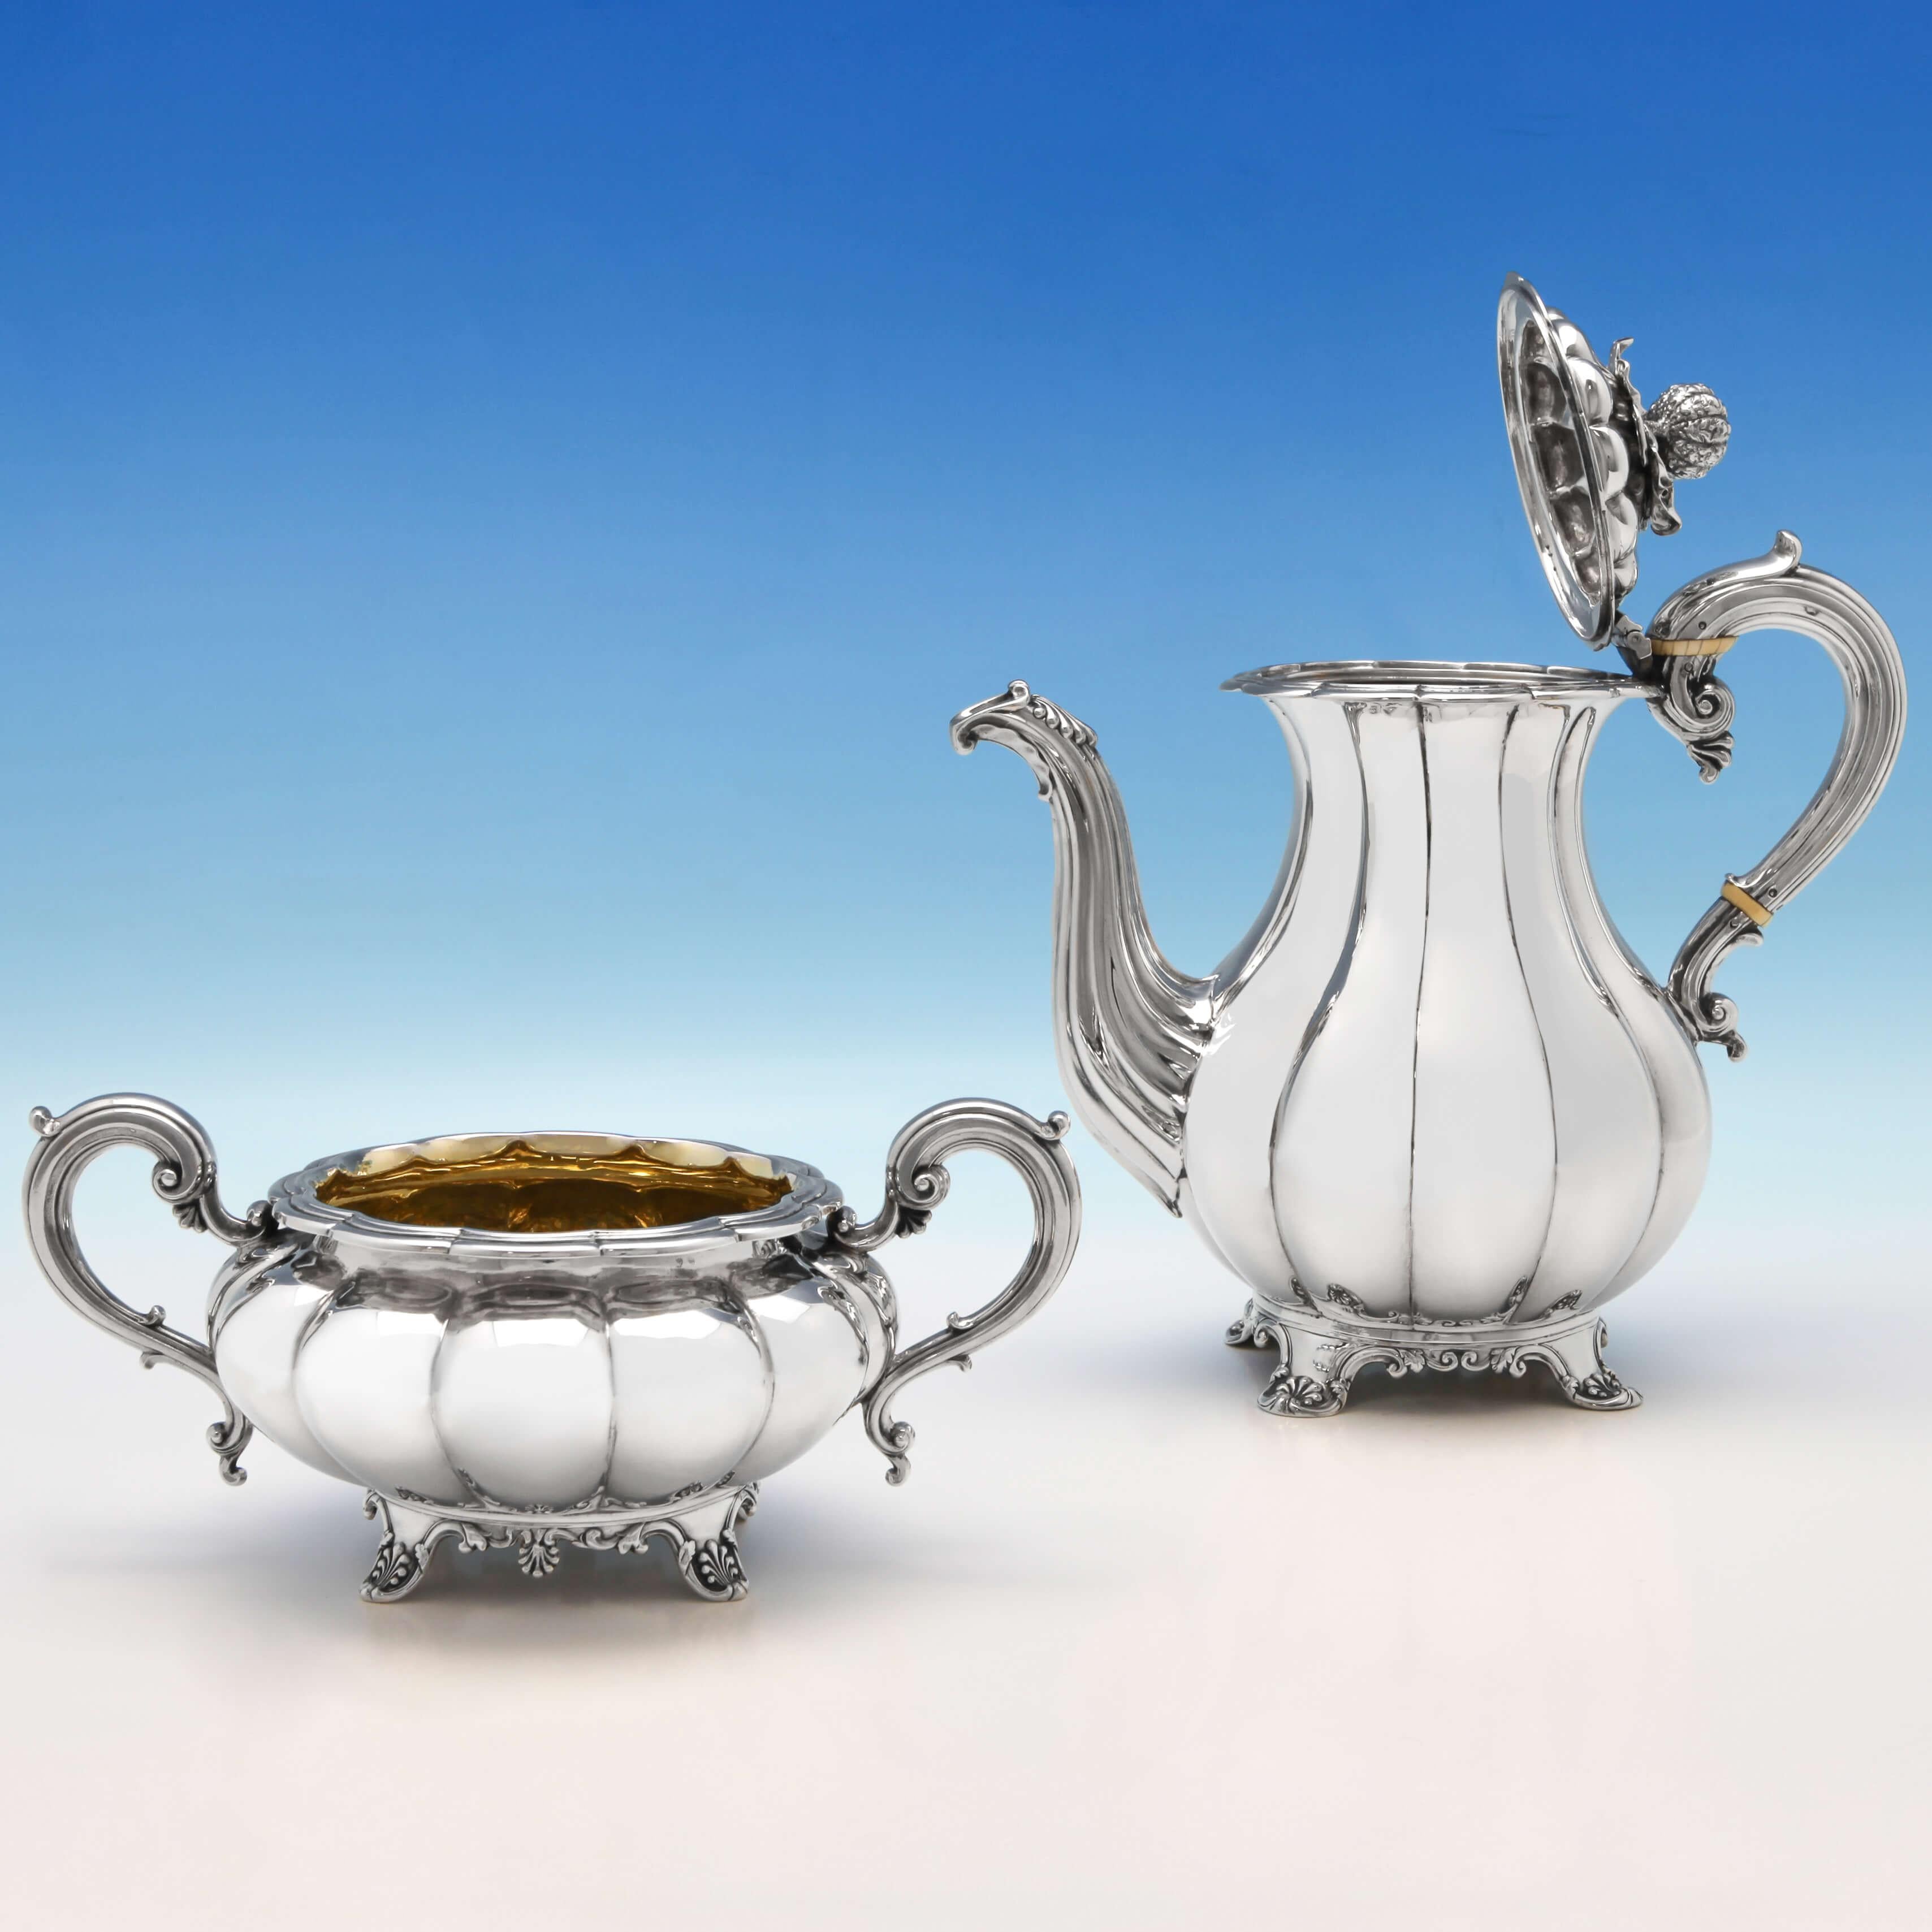 Melon Design Antique Sterling Silver Five-Piece Tea and Coffee Set by Barnards In Good Condition In London, London